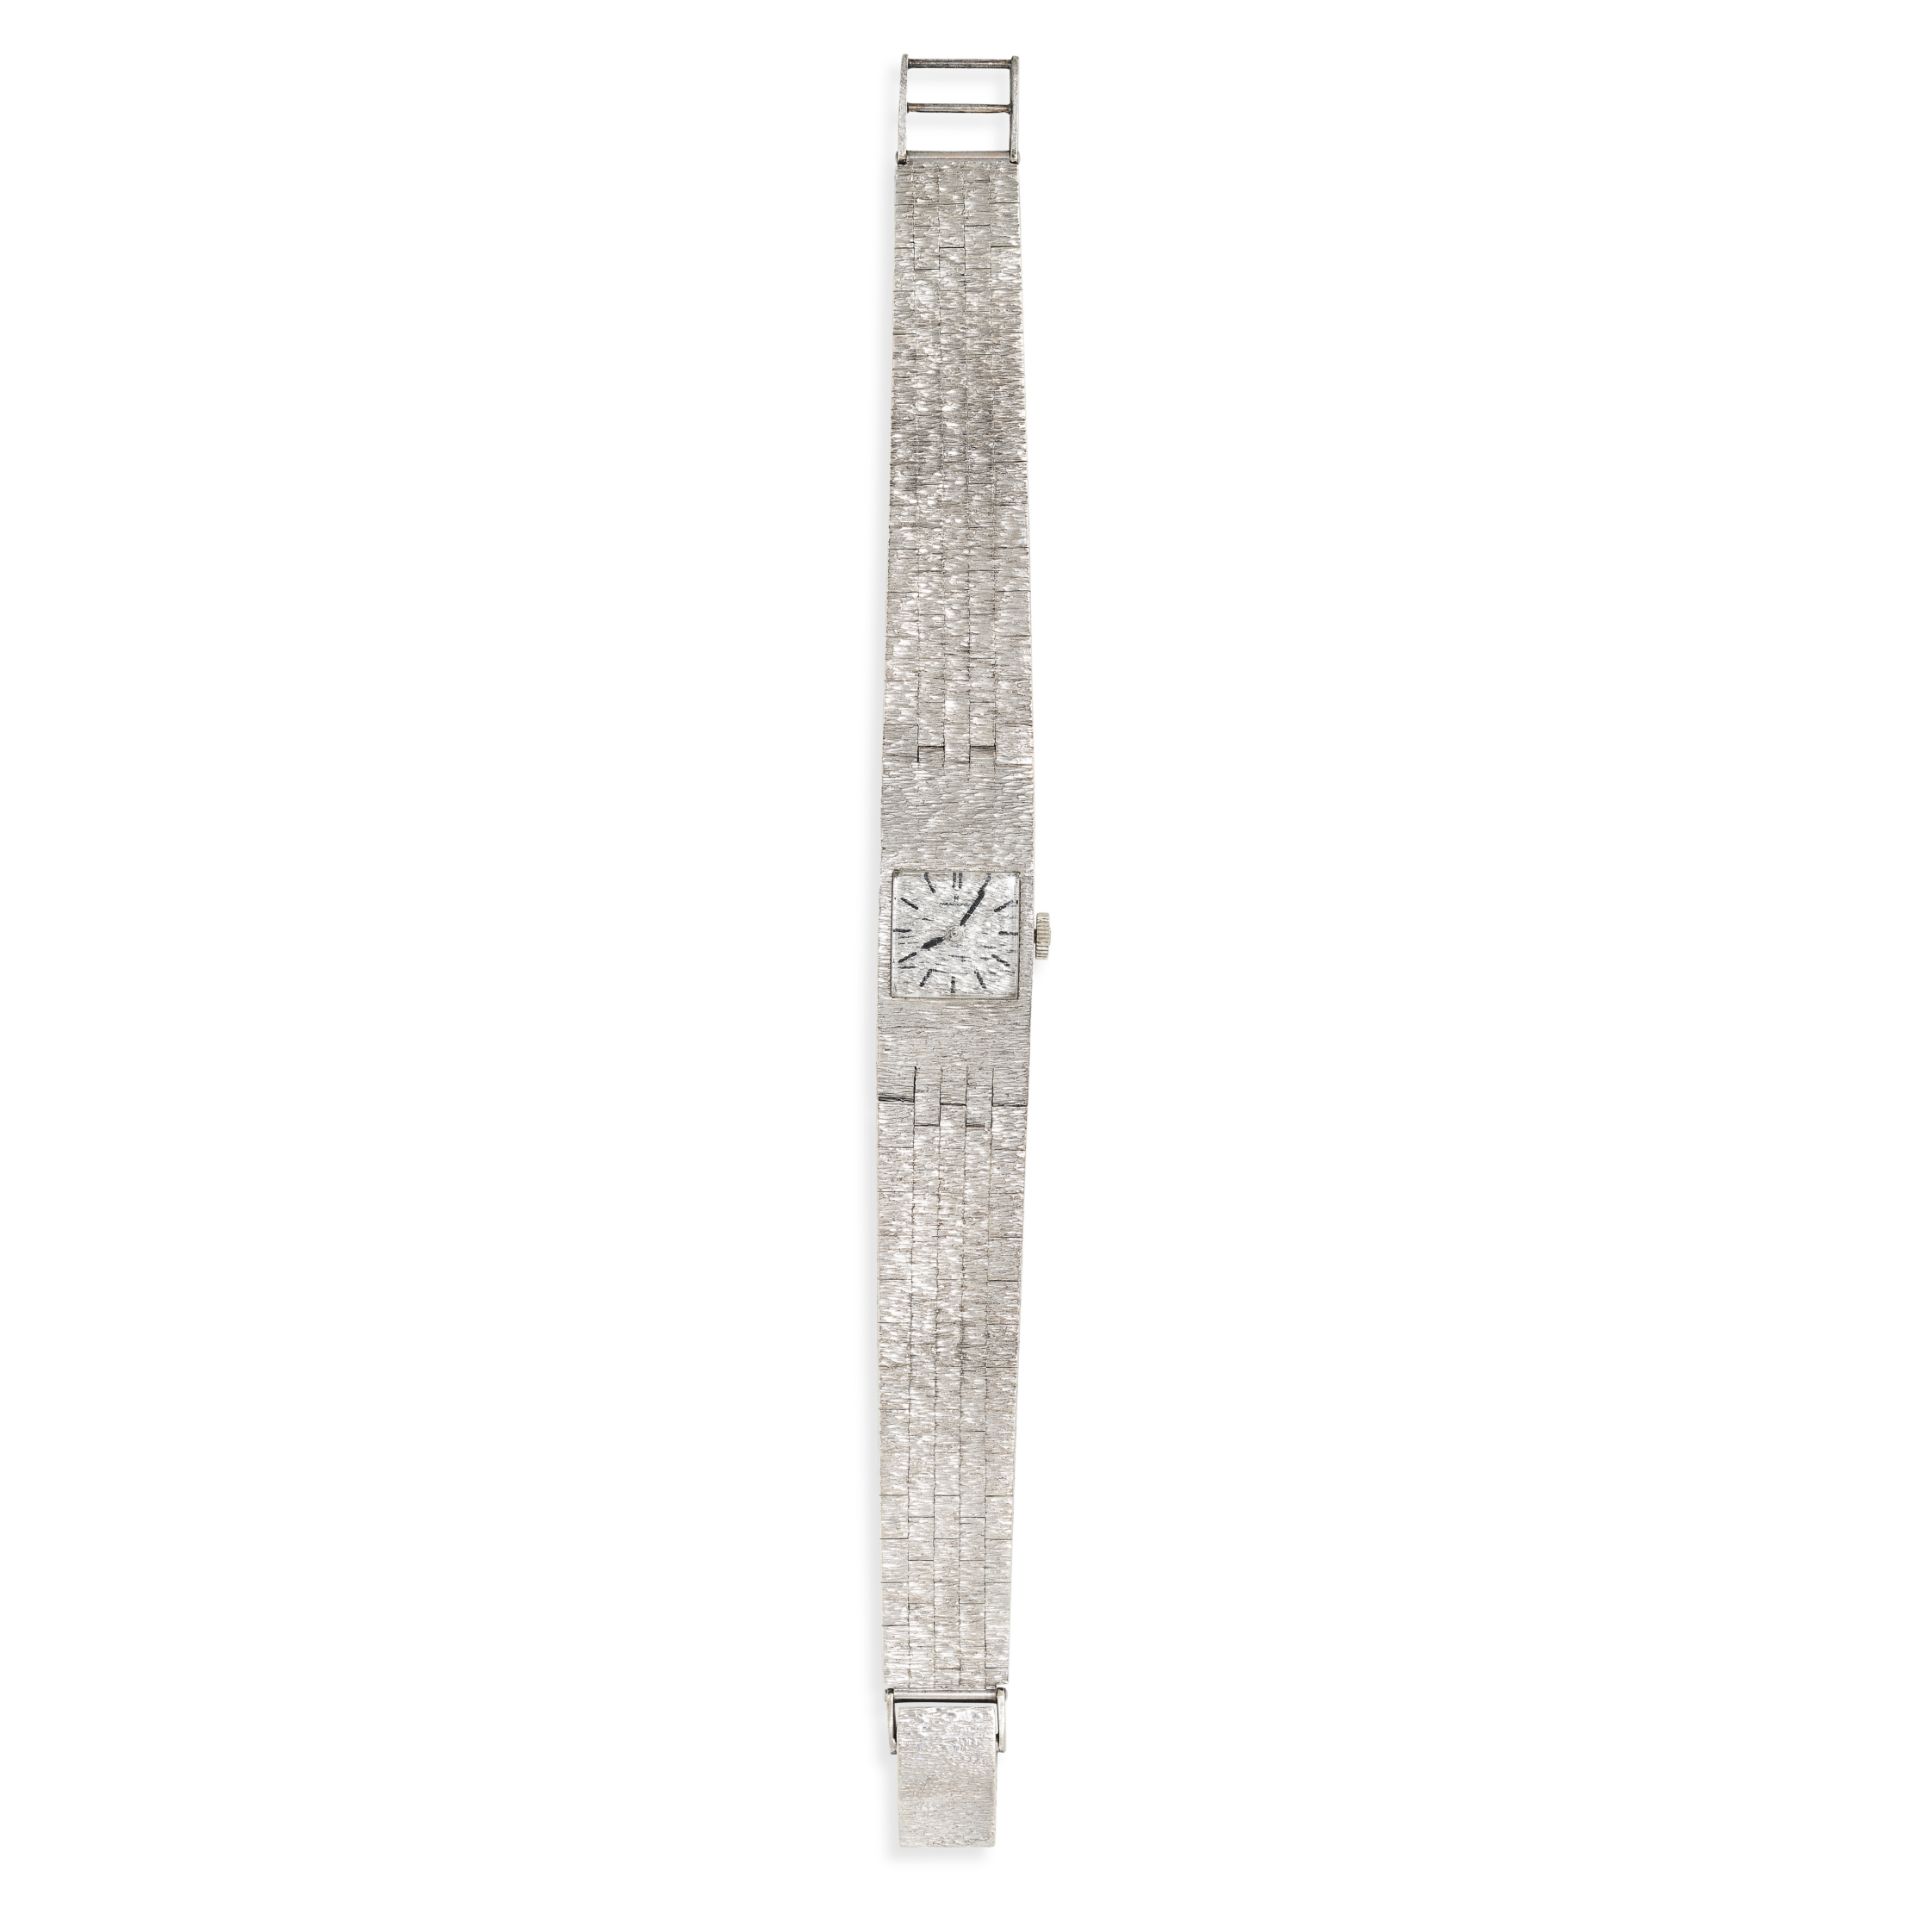 HAMILTON, A VINTAGE LADIES WATCH in 9ct white gold, with square silver dial and textured detail to